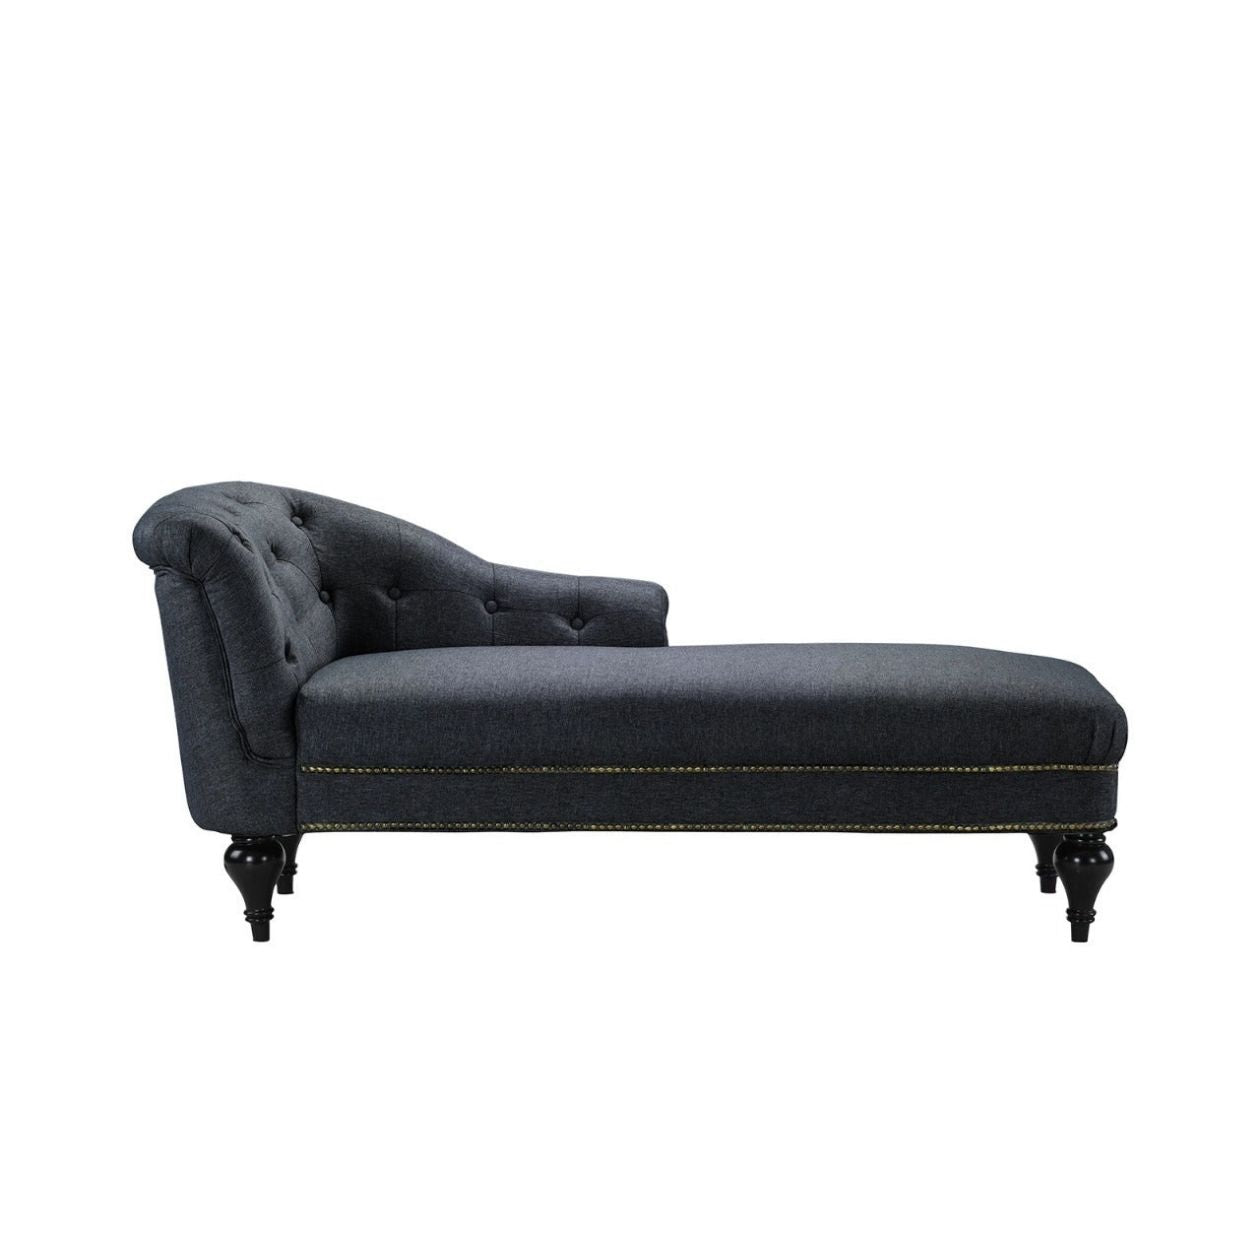 Chaise Lounge Linen Upholstered Classic Chaise Lounge With Tufted Button